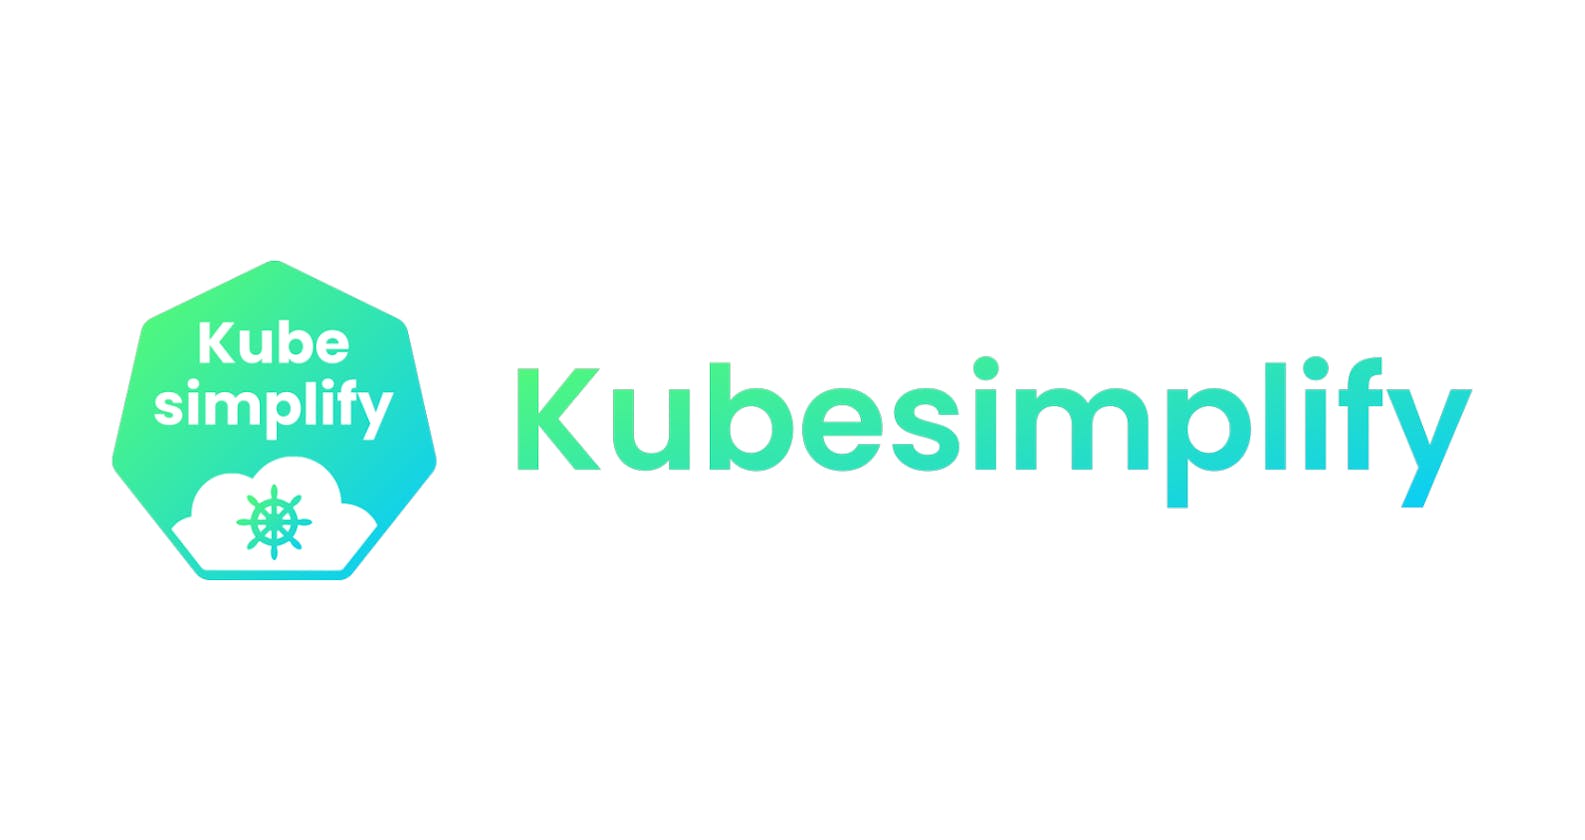 Kubesimplify - A Journey to remember